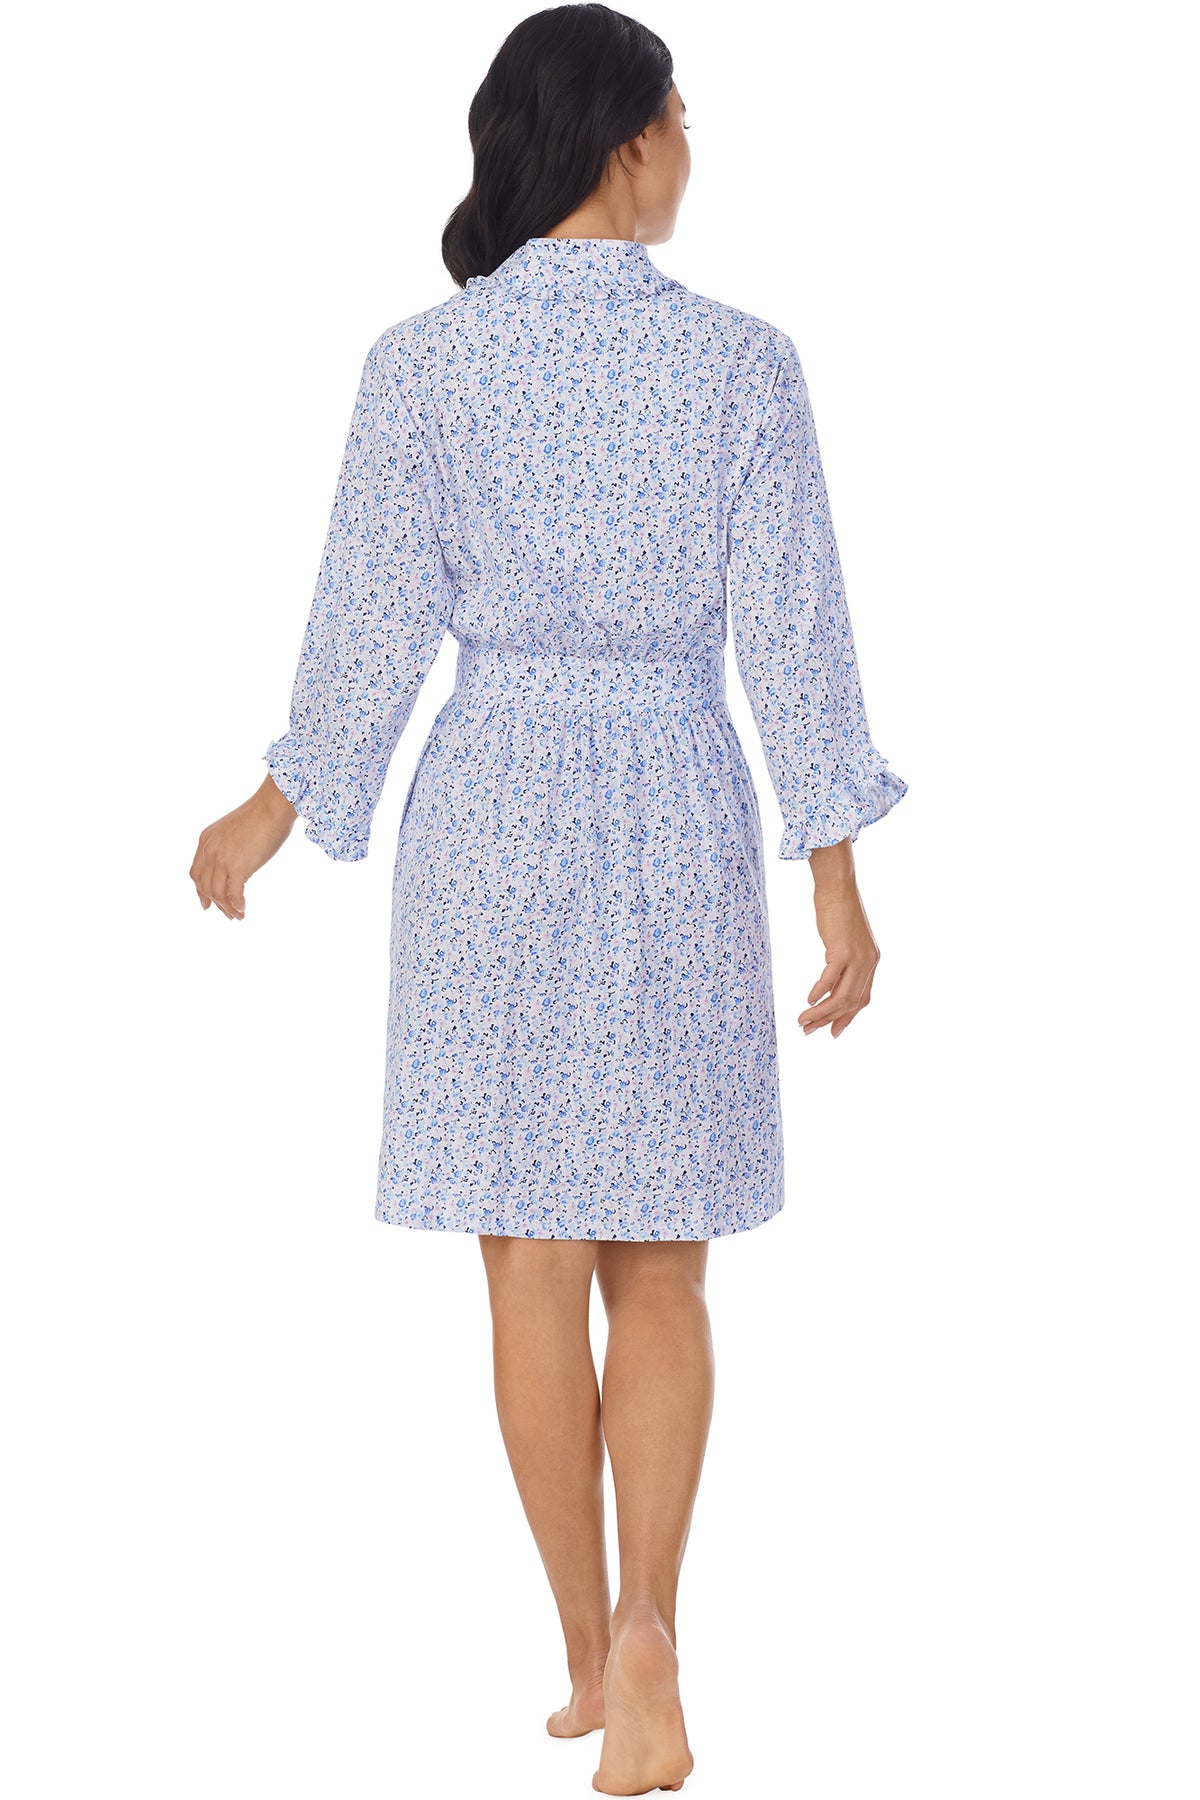 A lady wearing a white long sleeve shortie wrap with blue floral pattern.